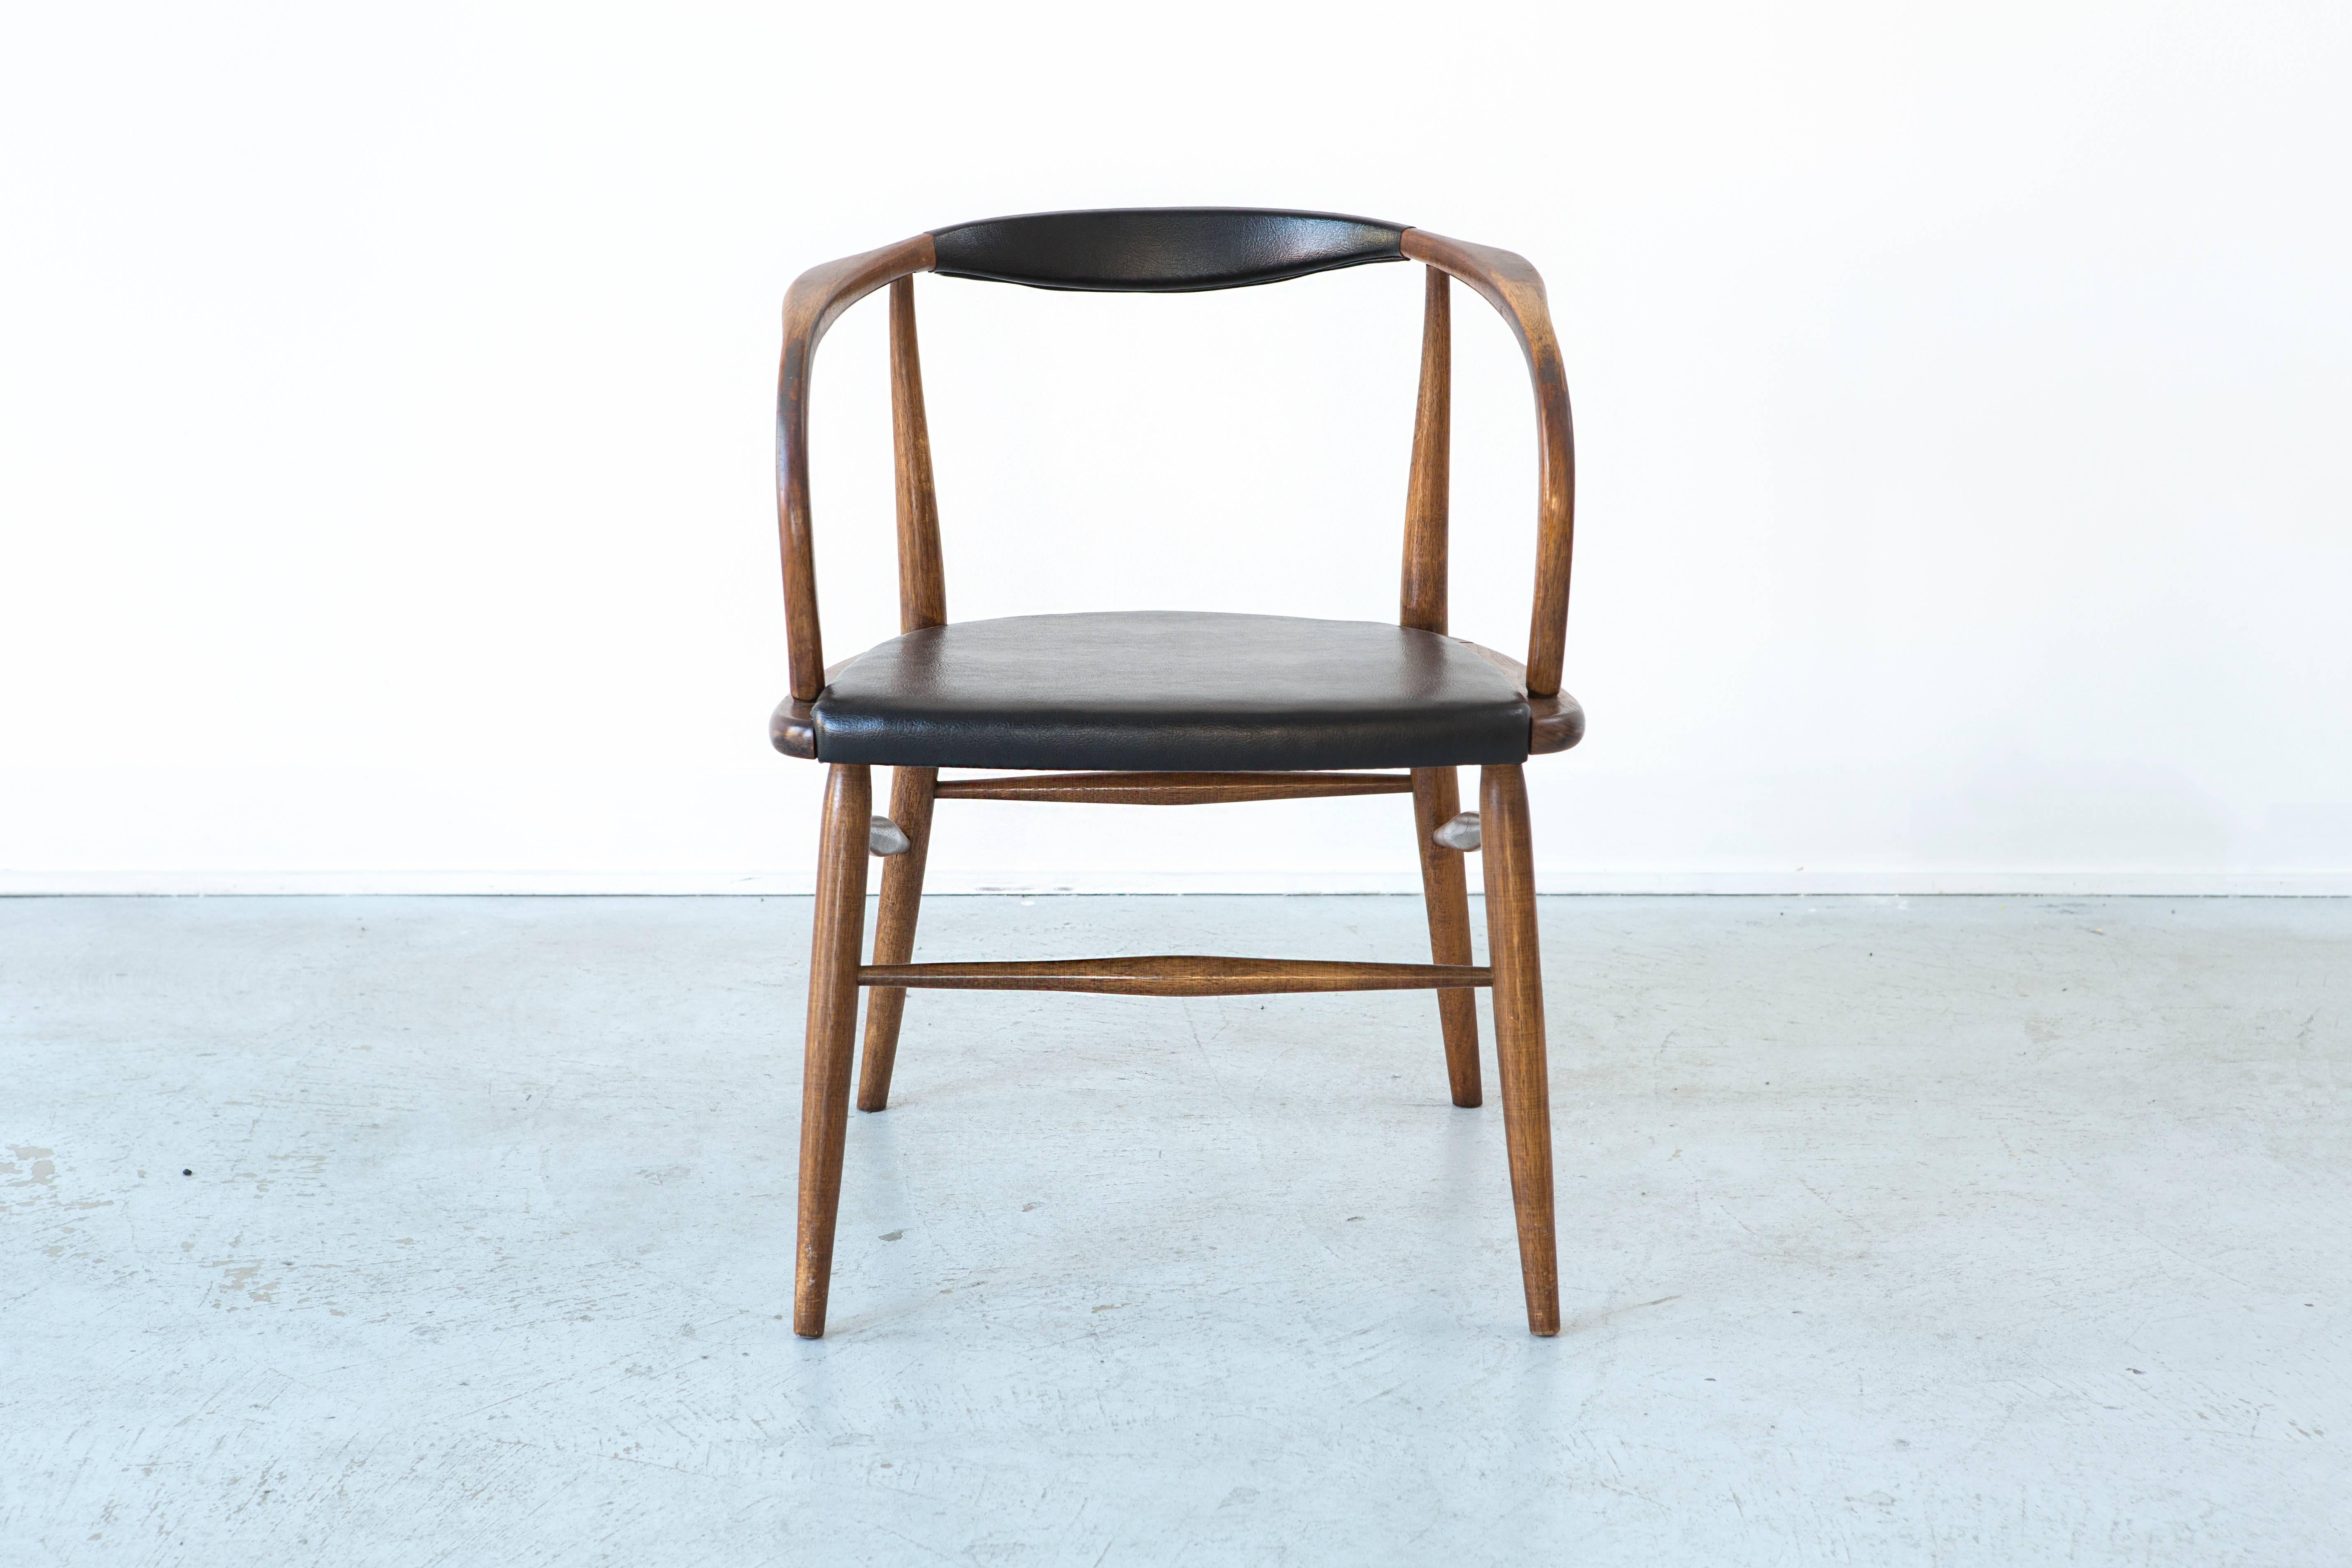 Set of six bentwood dining chairs

designed by Lawrence Peabody for Richardson Nemschoff

USA, circa 1950s

Wood and original upholstery

Measures: 27 ¼" H x 20 ¾" W x 18 ⅞" D x seat 17 ½" H

Sold as a set